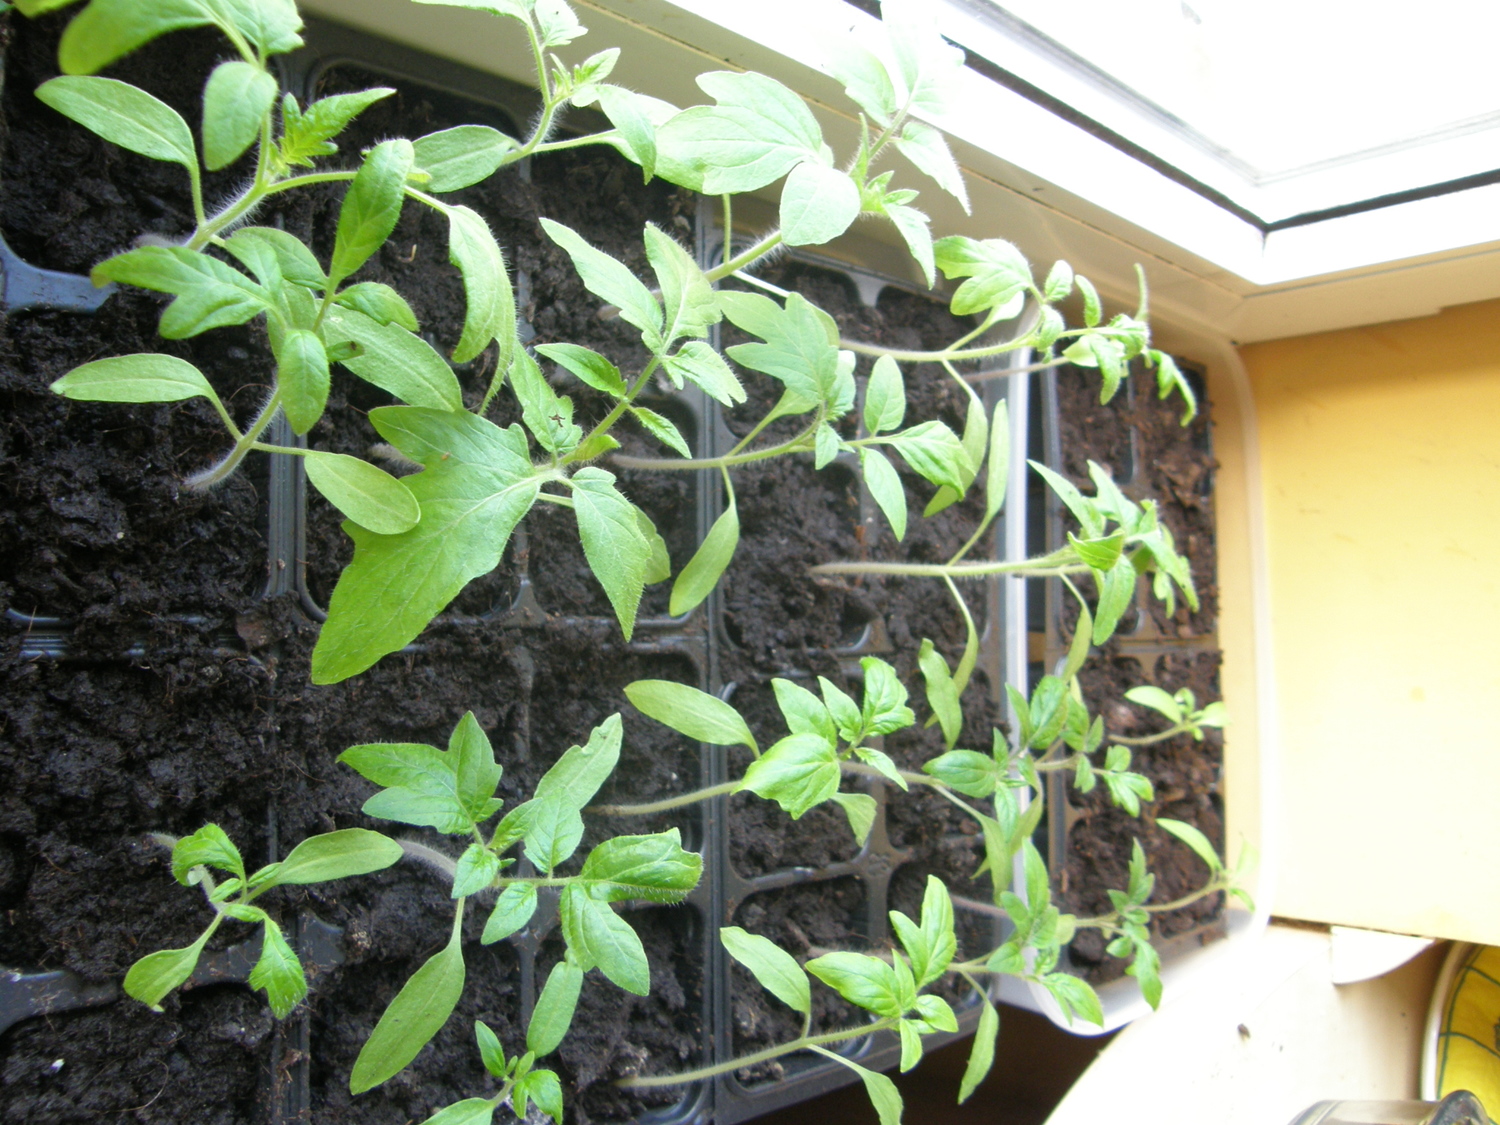 Growing tomato sprouts